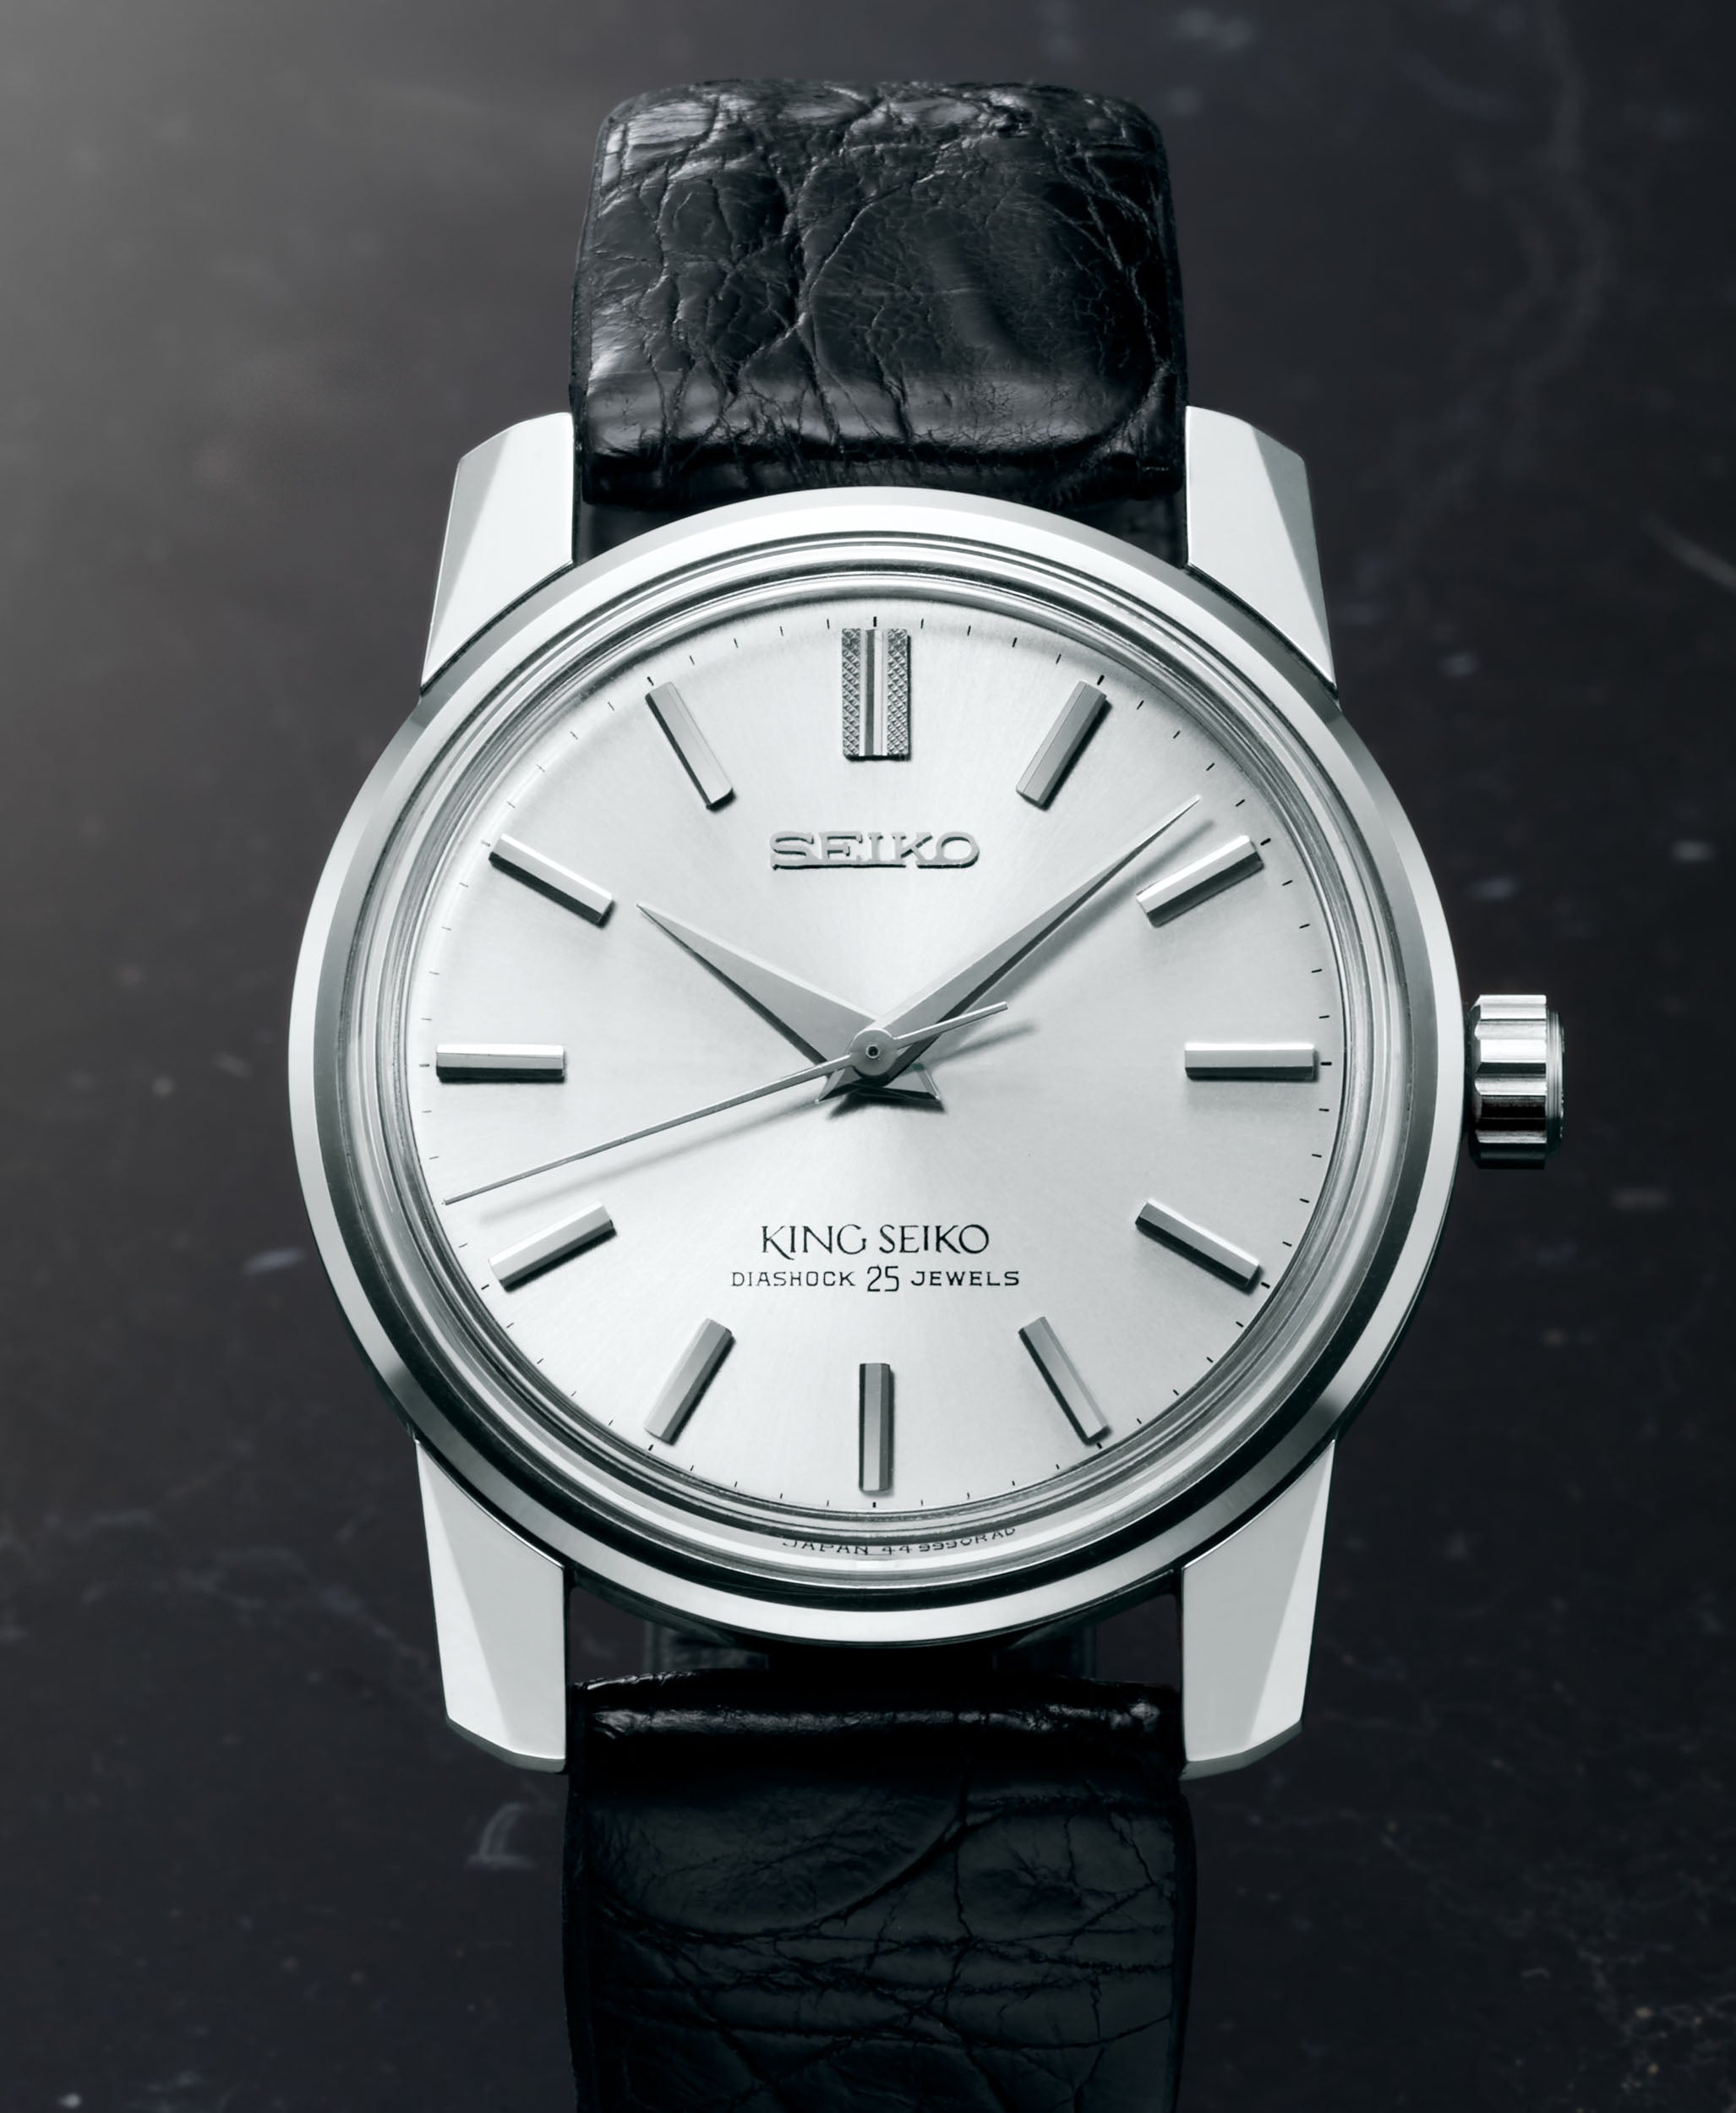 Return of the King: The new King Seiko KSK and Caliber 6L35– Strapcode